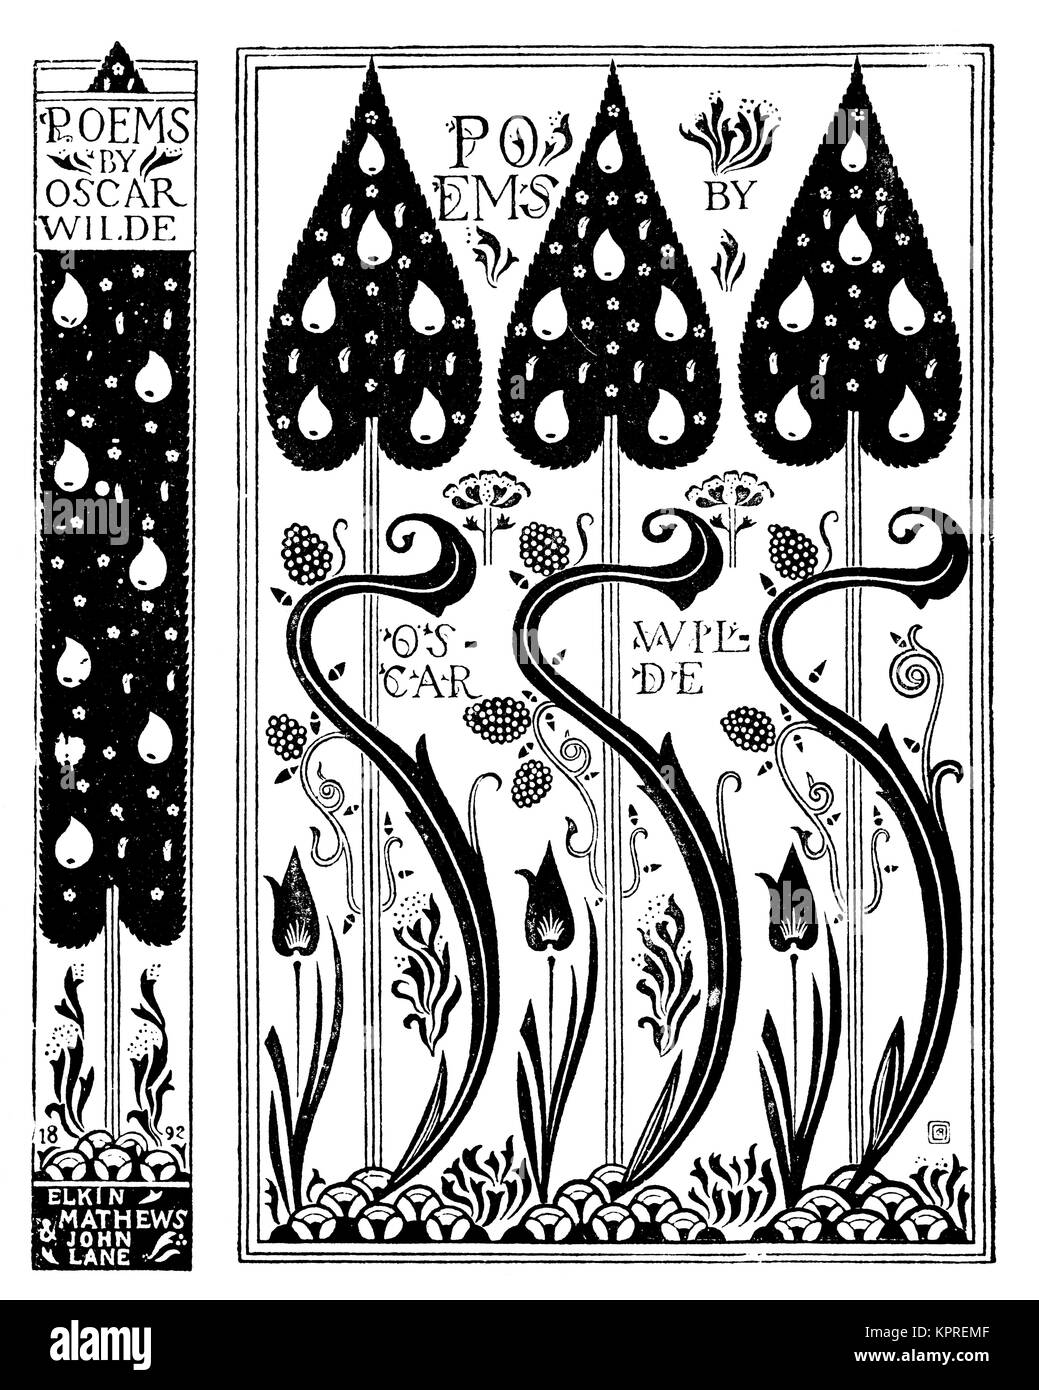 Poems of Oscar Wilde, 1892 book cover design by artist Charles Ricketts from Volume 4 of The Studio Magazine Stock Photo